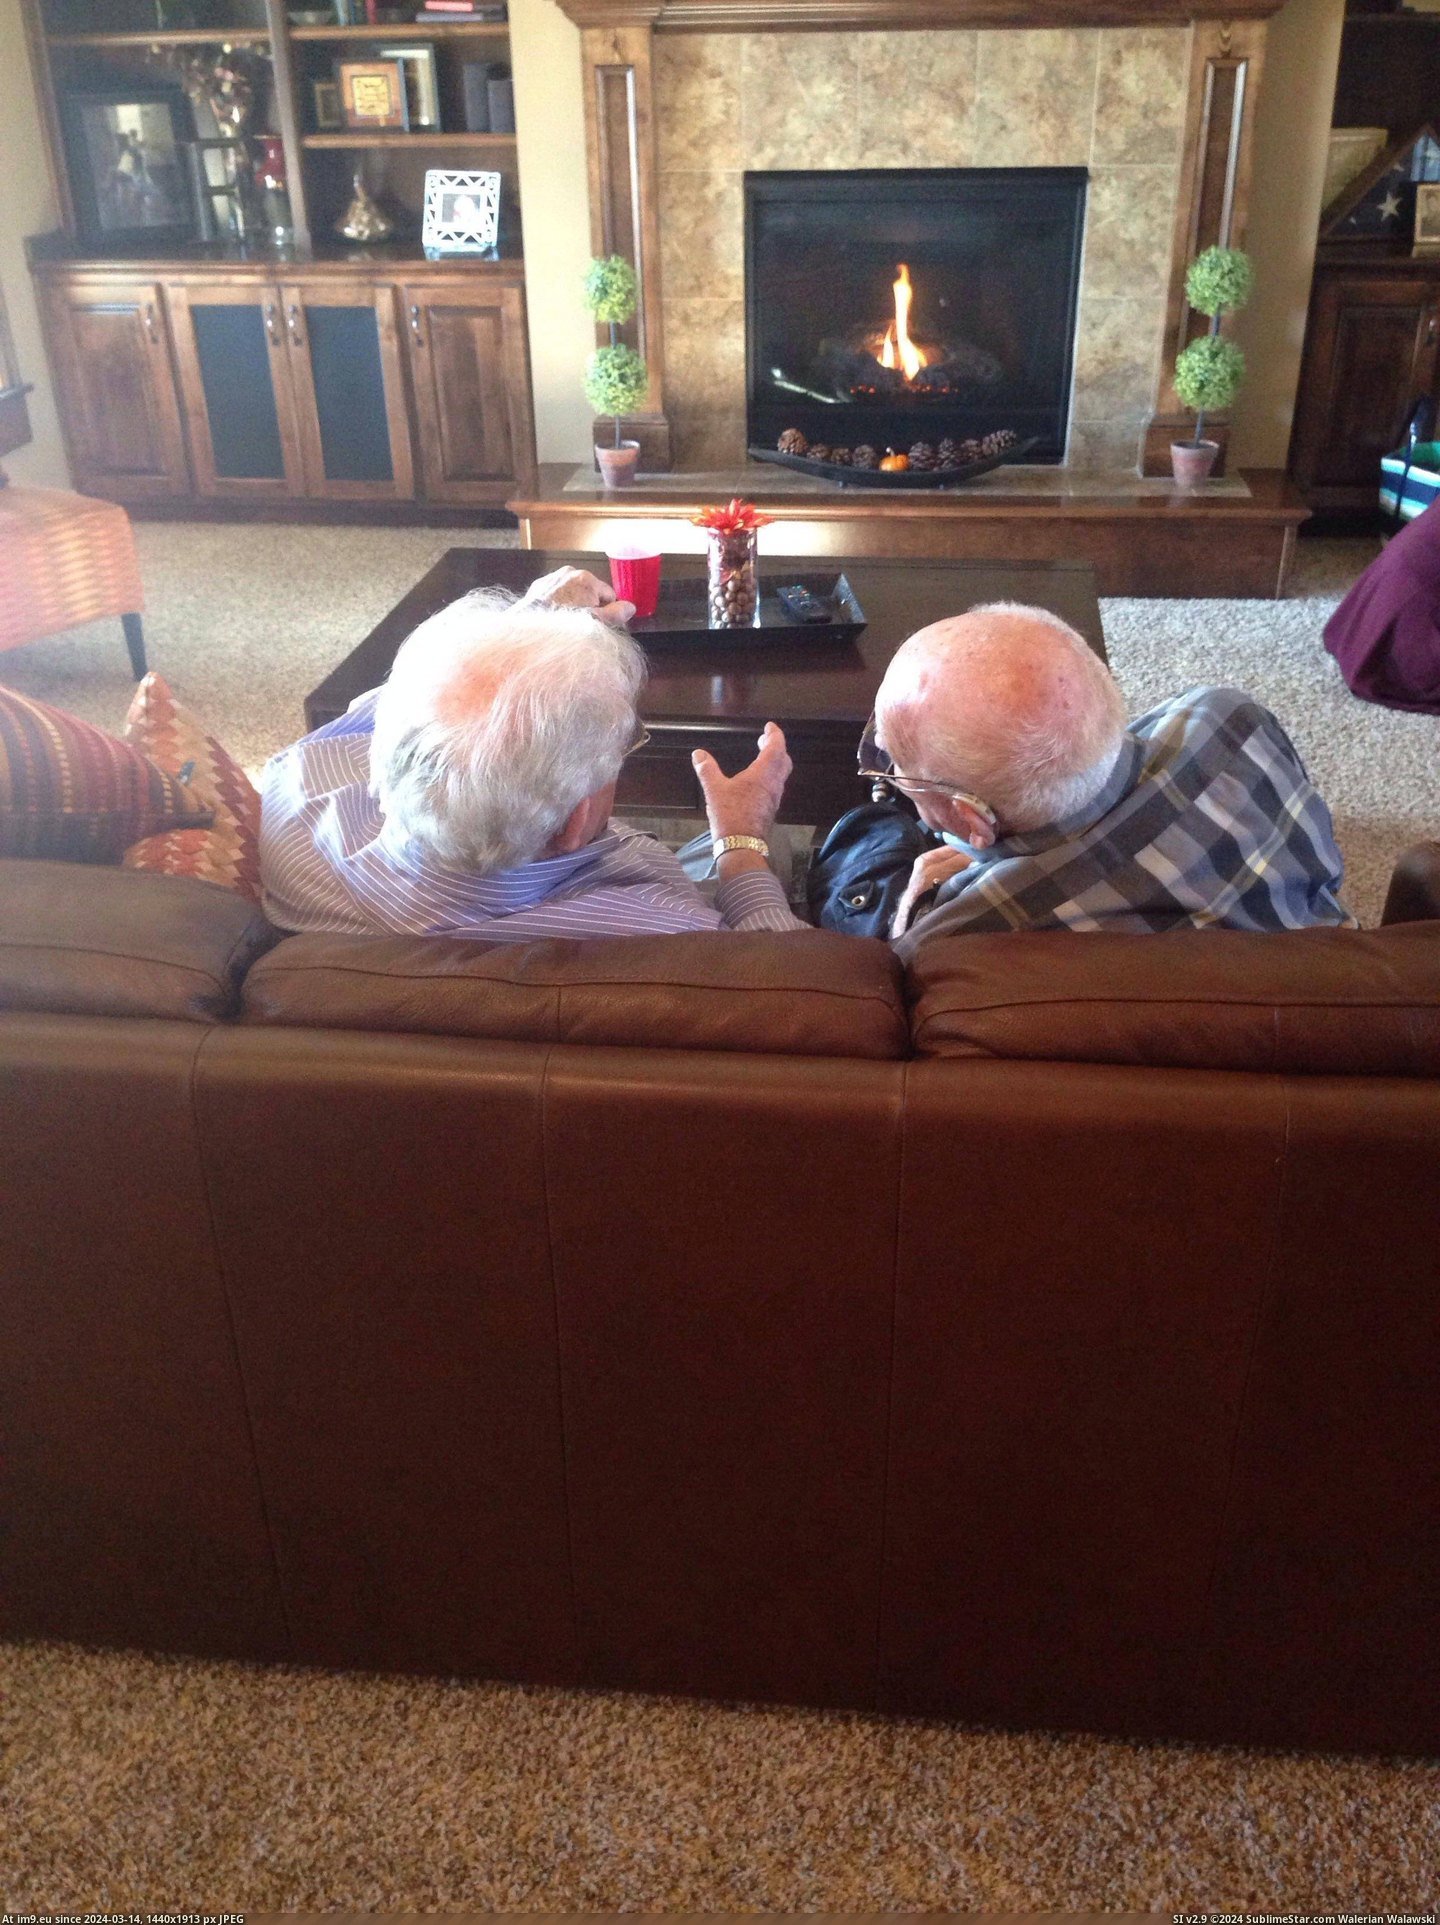 #Year #Old #Thanksgiving #Reminiscing #Brother #Grandpa [Aww] My 87 year old Grandpa and his 92 year old brother reminiscing on Thanksgiving. Pic. (Bild von album My r/AWW favs))